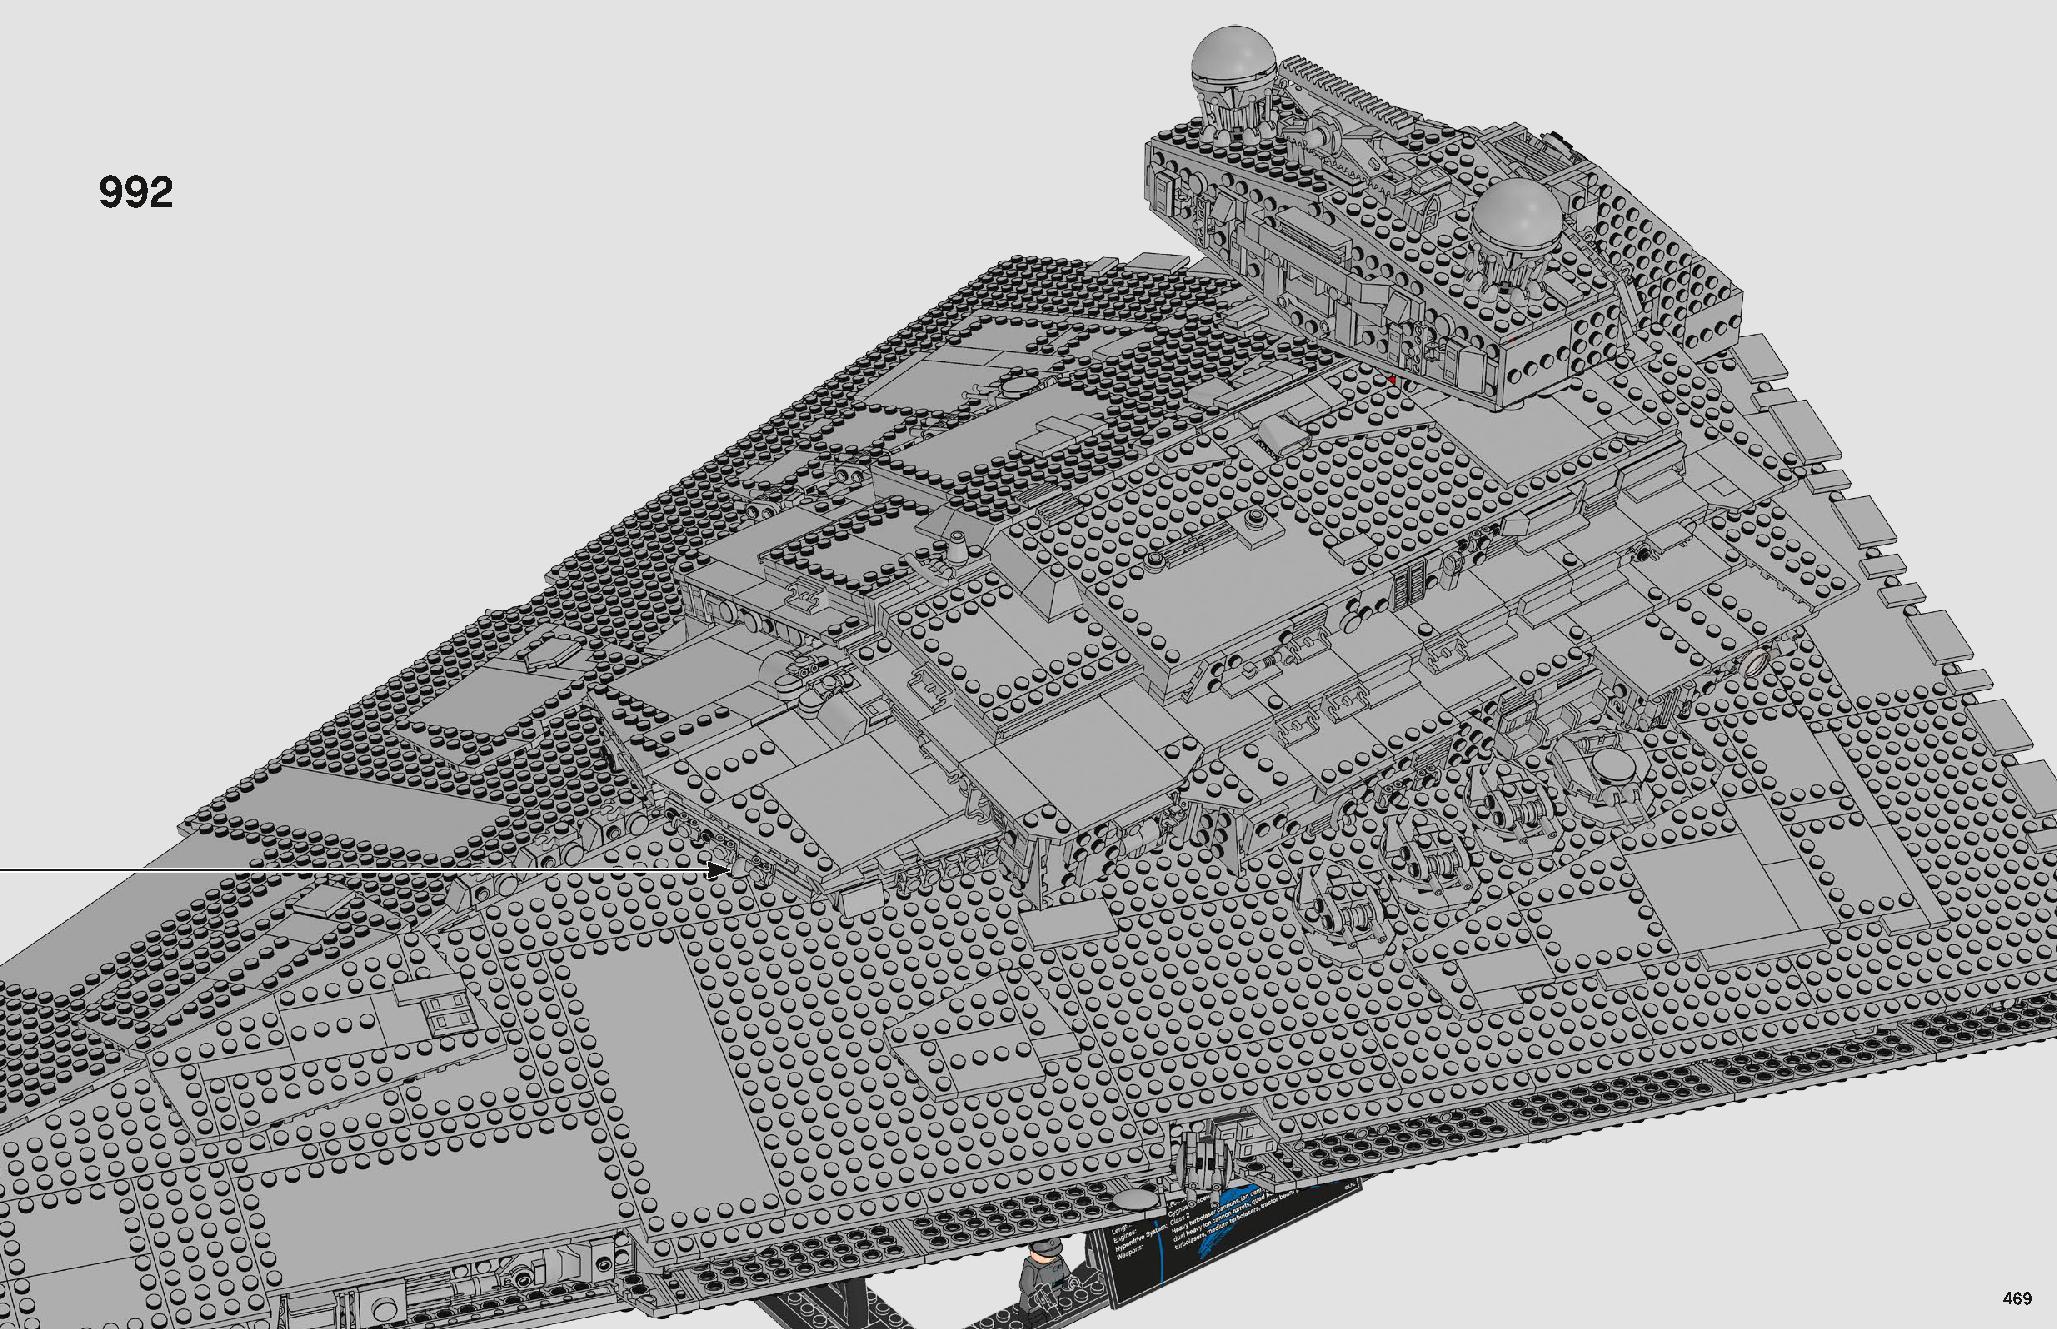 Imperial Star Destroyer 75252 レゴの商品情報 レゴの説明書・組立方法 469 page